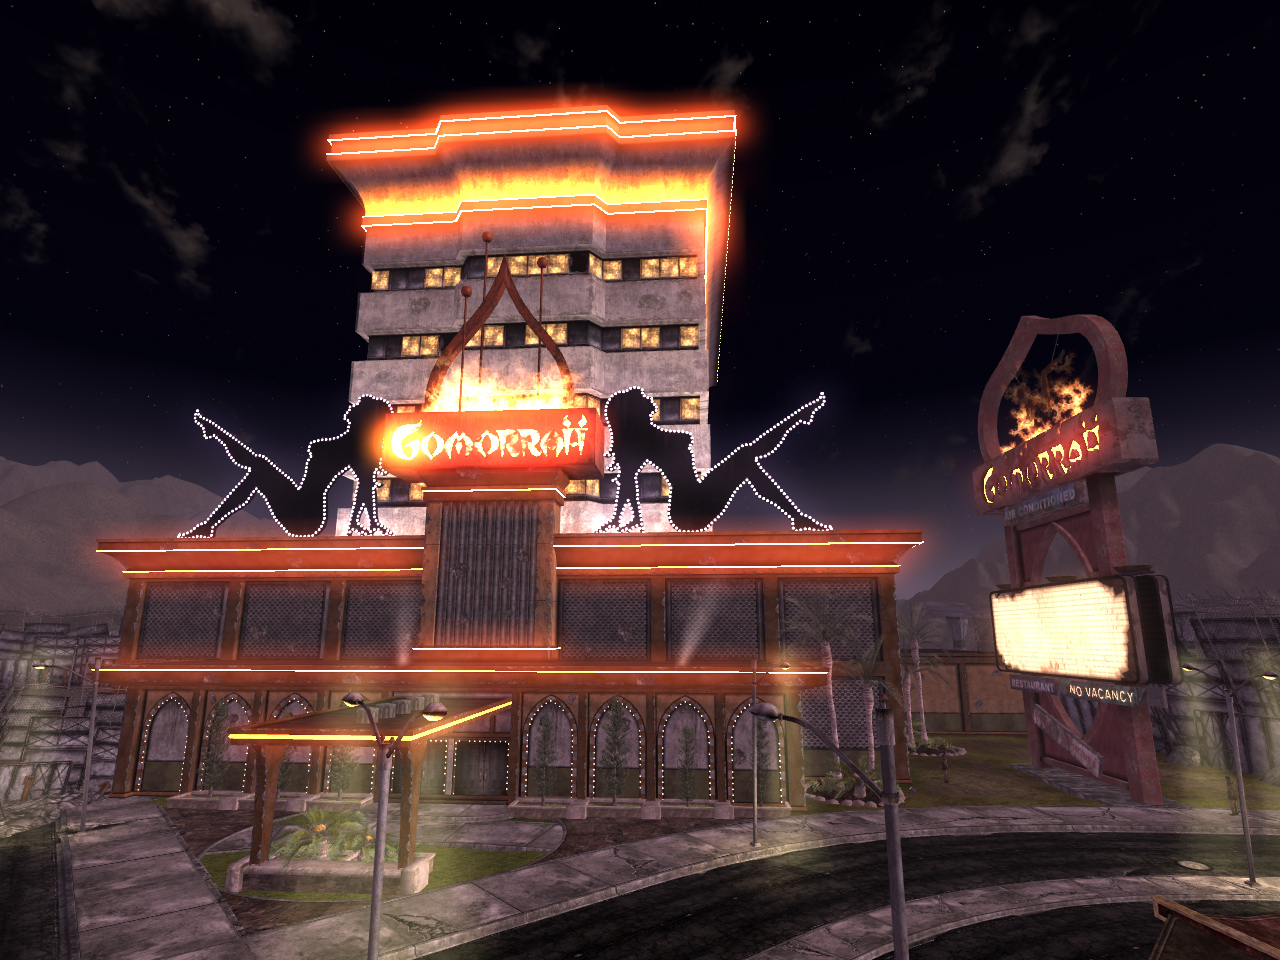 New Vegas Strip Gomorrah and LVB monorail station – The Lucky Thirty Kate